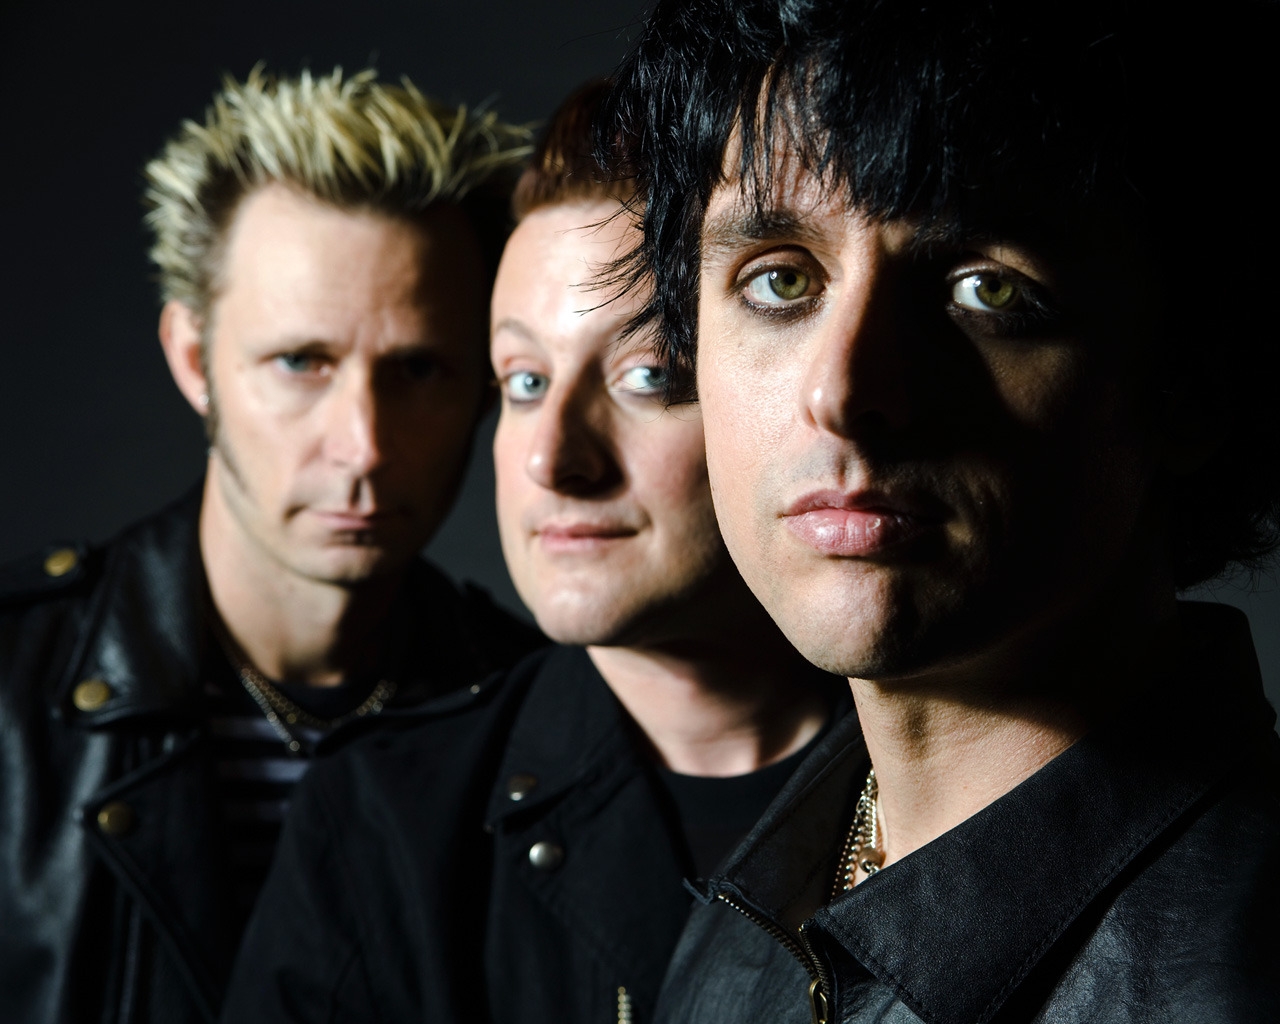 Green Day Band in Blak for 1280 x 1024 resolution